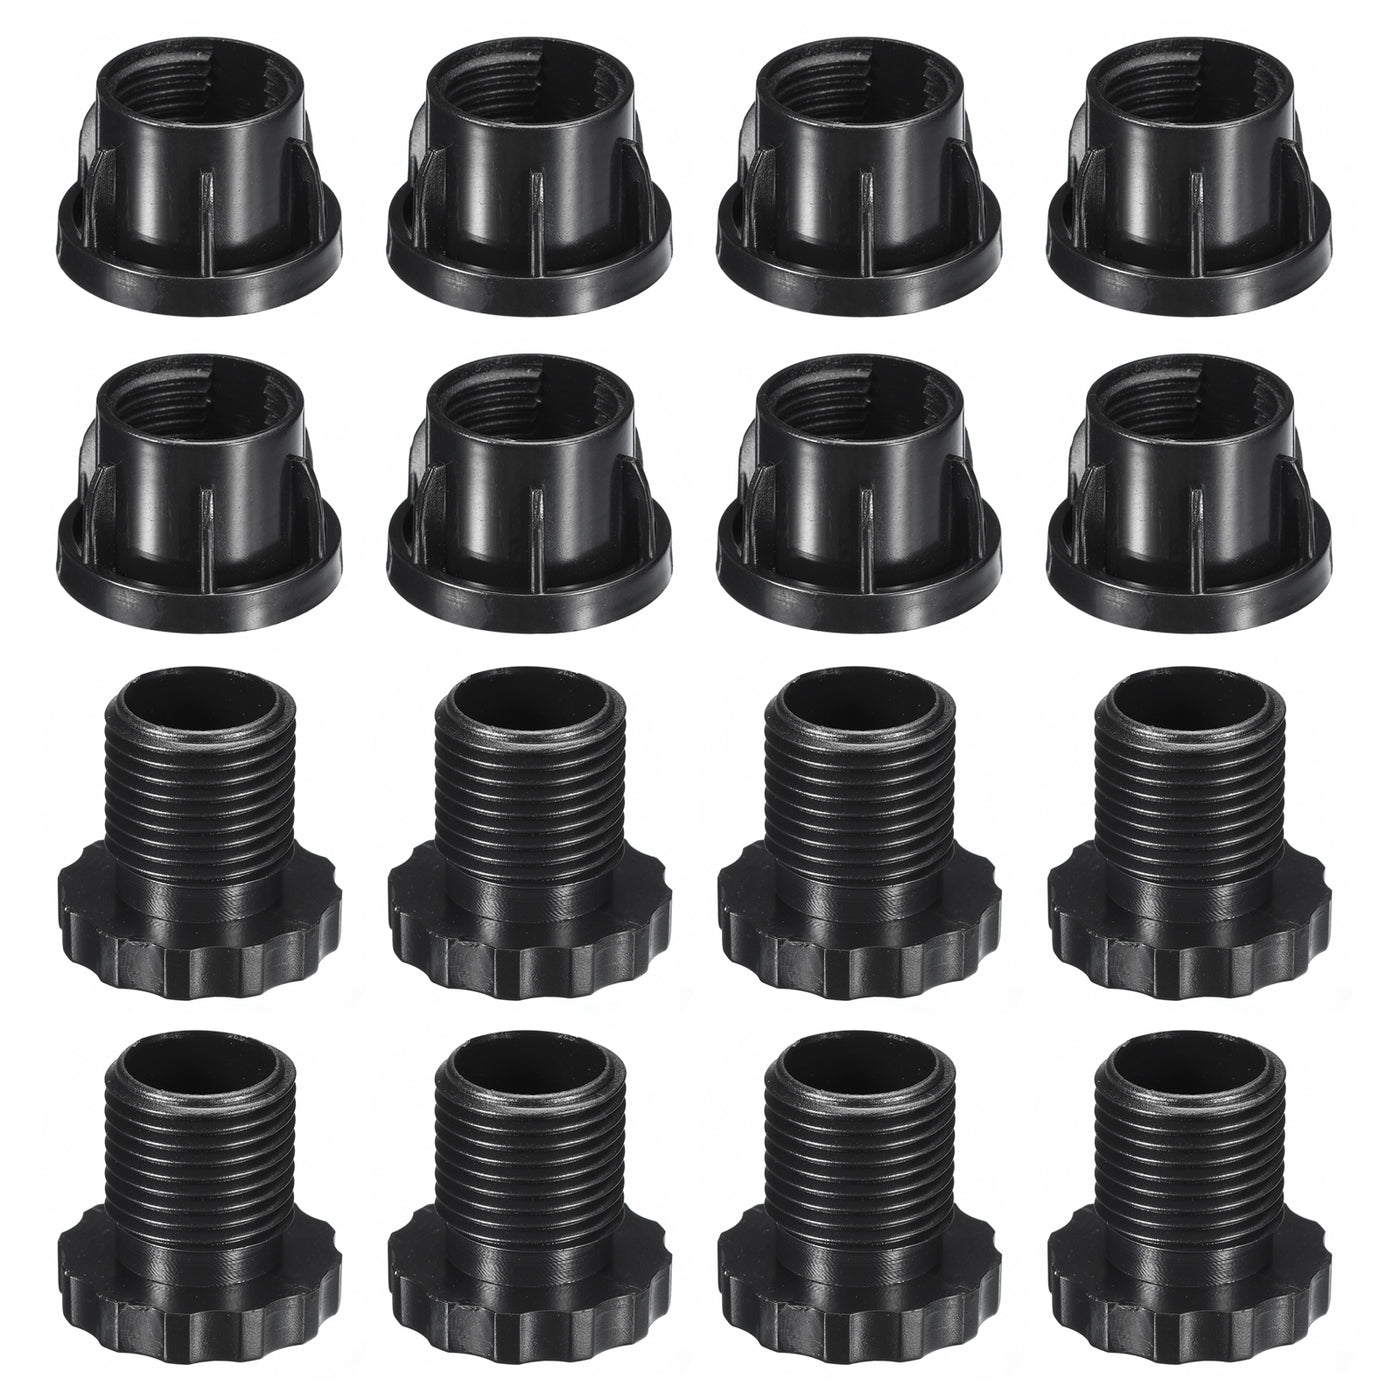 uxcell Uxcell 8Pcs Inserts for Round Tubes with Leveling Feet, for 30mm/1.18" Dia Round Tube